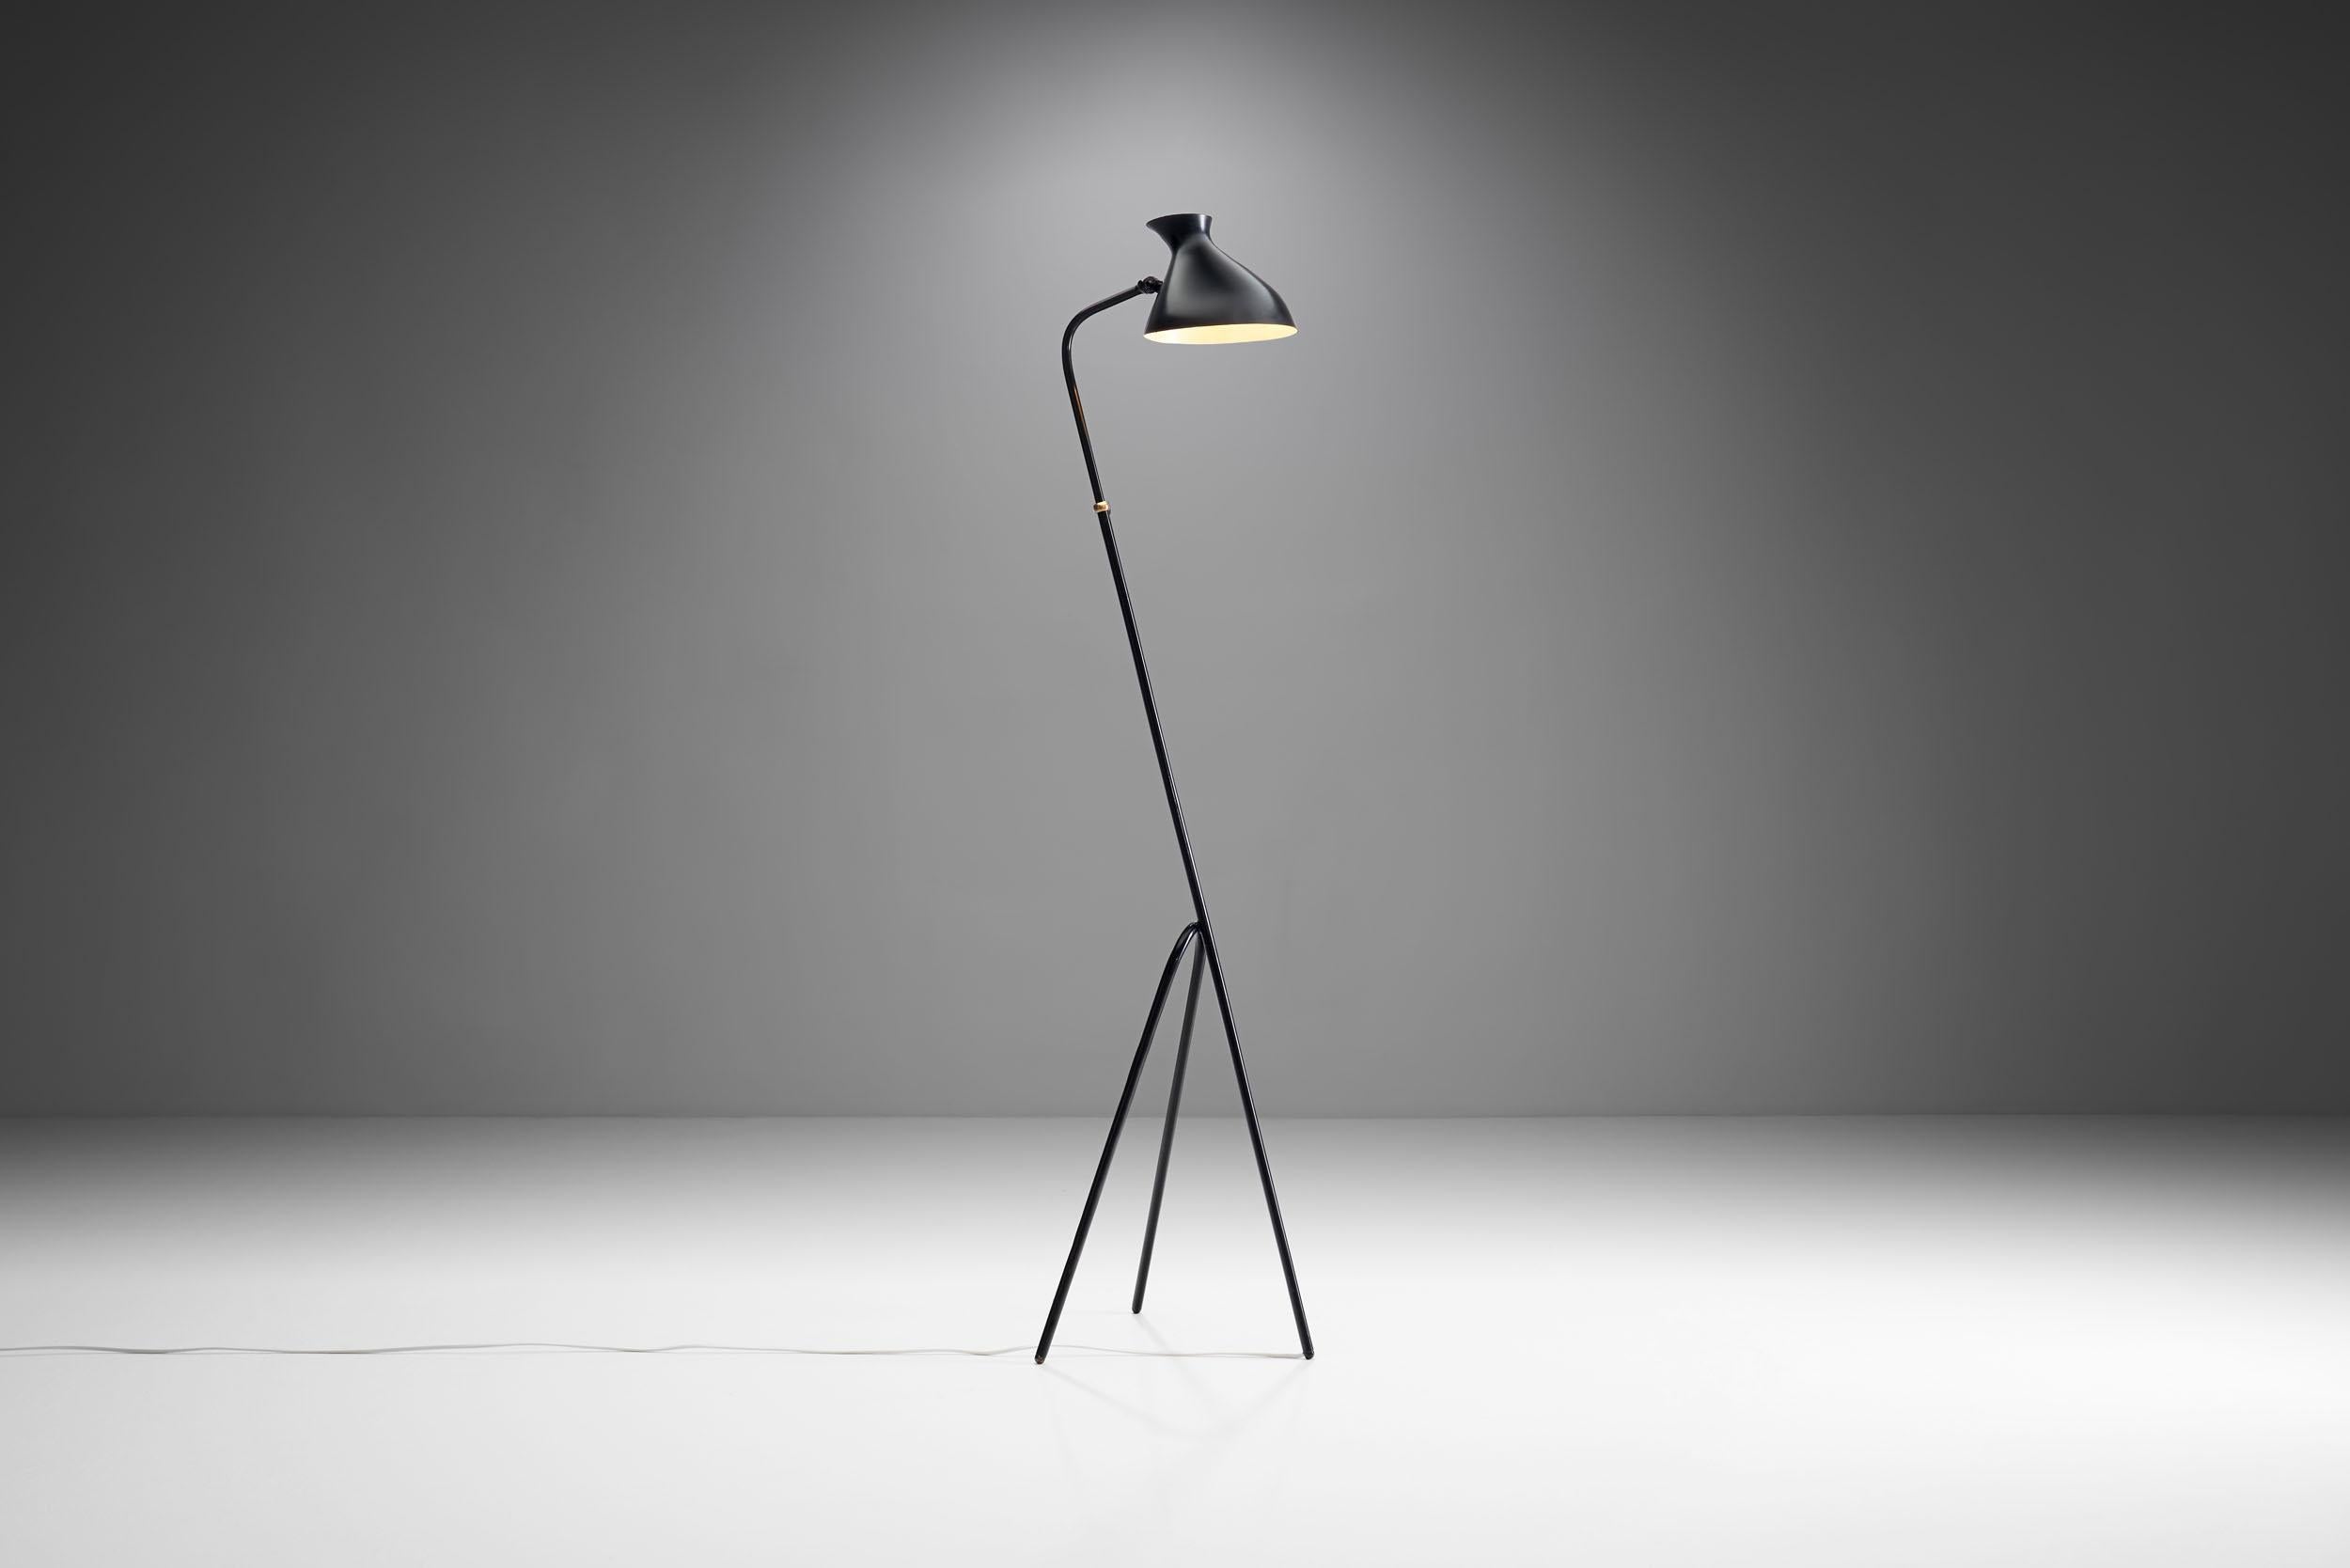 This characteristic floor lamp features a sleek appearance thanks to its distinctly shaped legs and shade. 

With its slender and elongated shape and black lacquered body, this lamp is a great modernist piece that stands out in any space. The